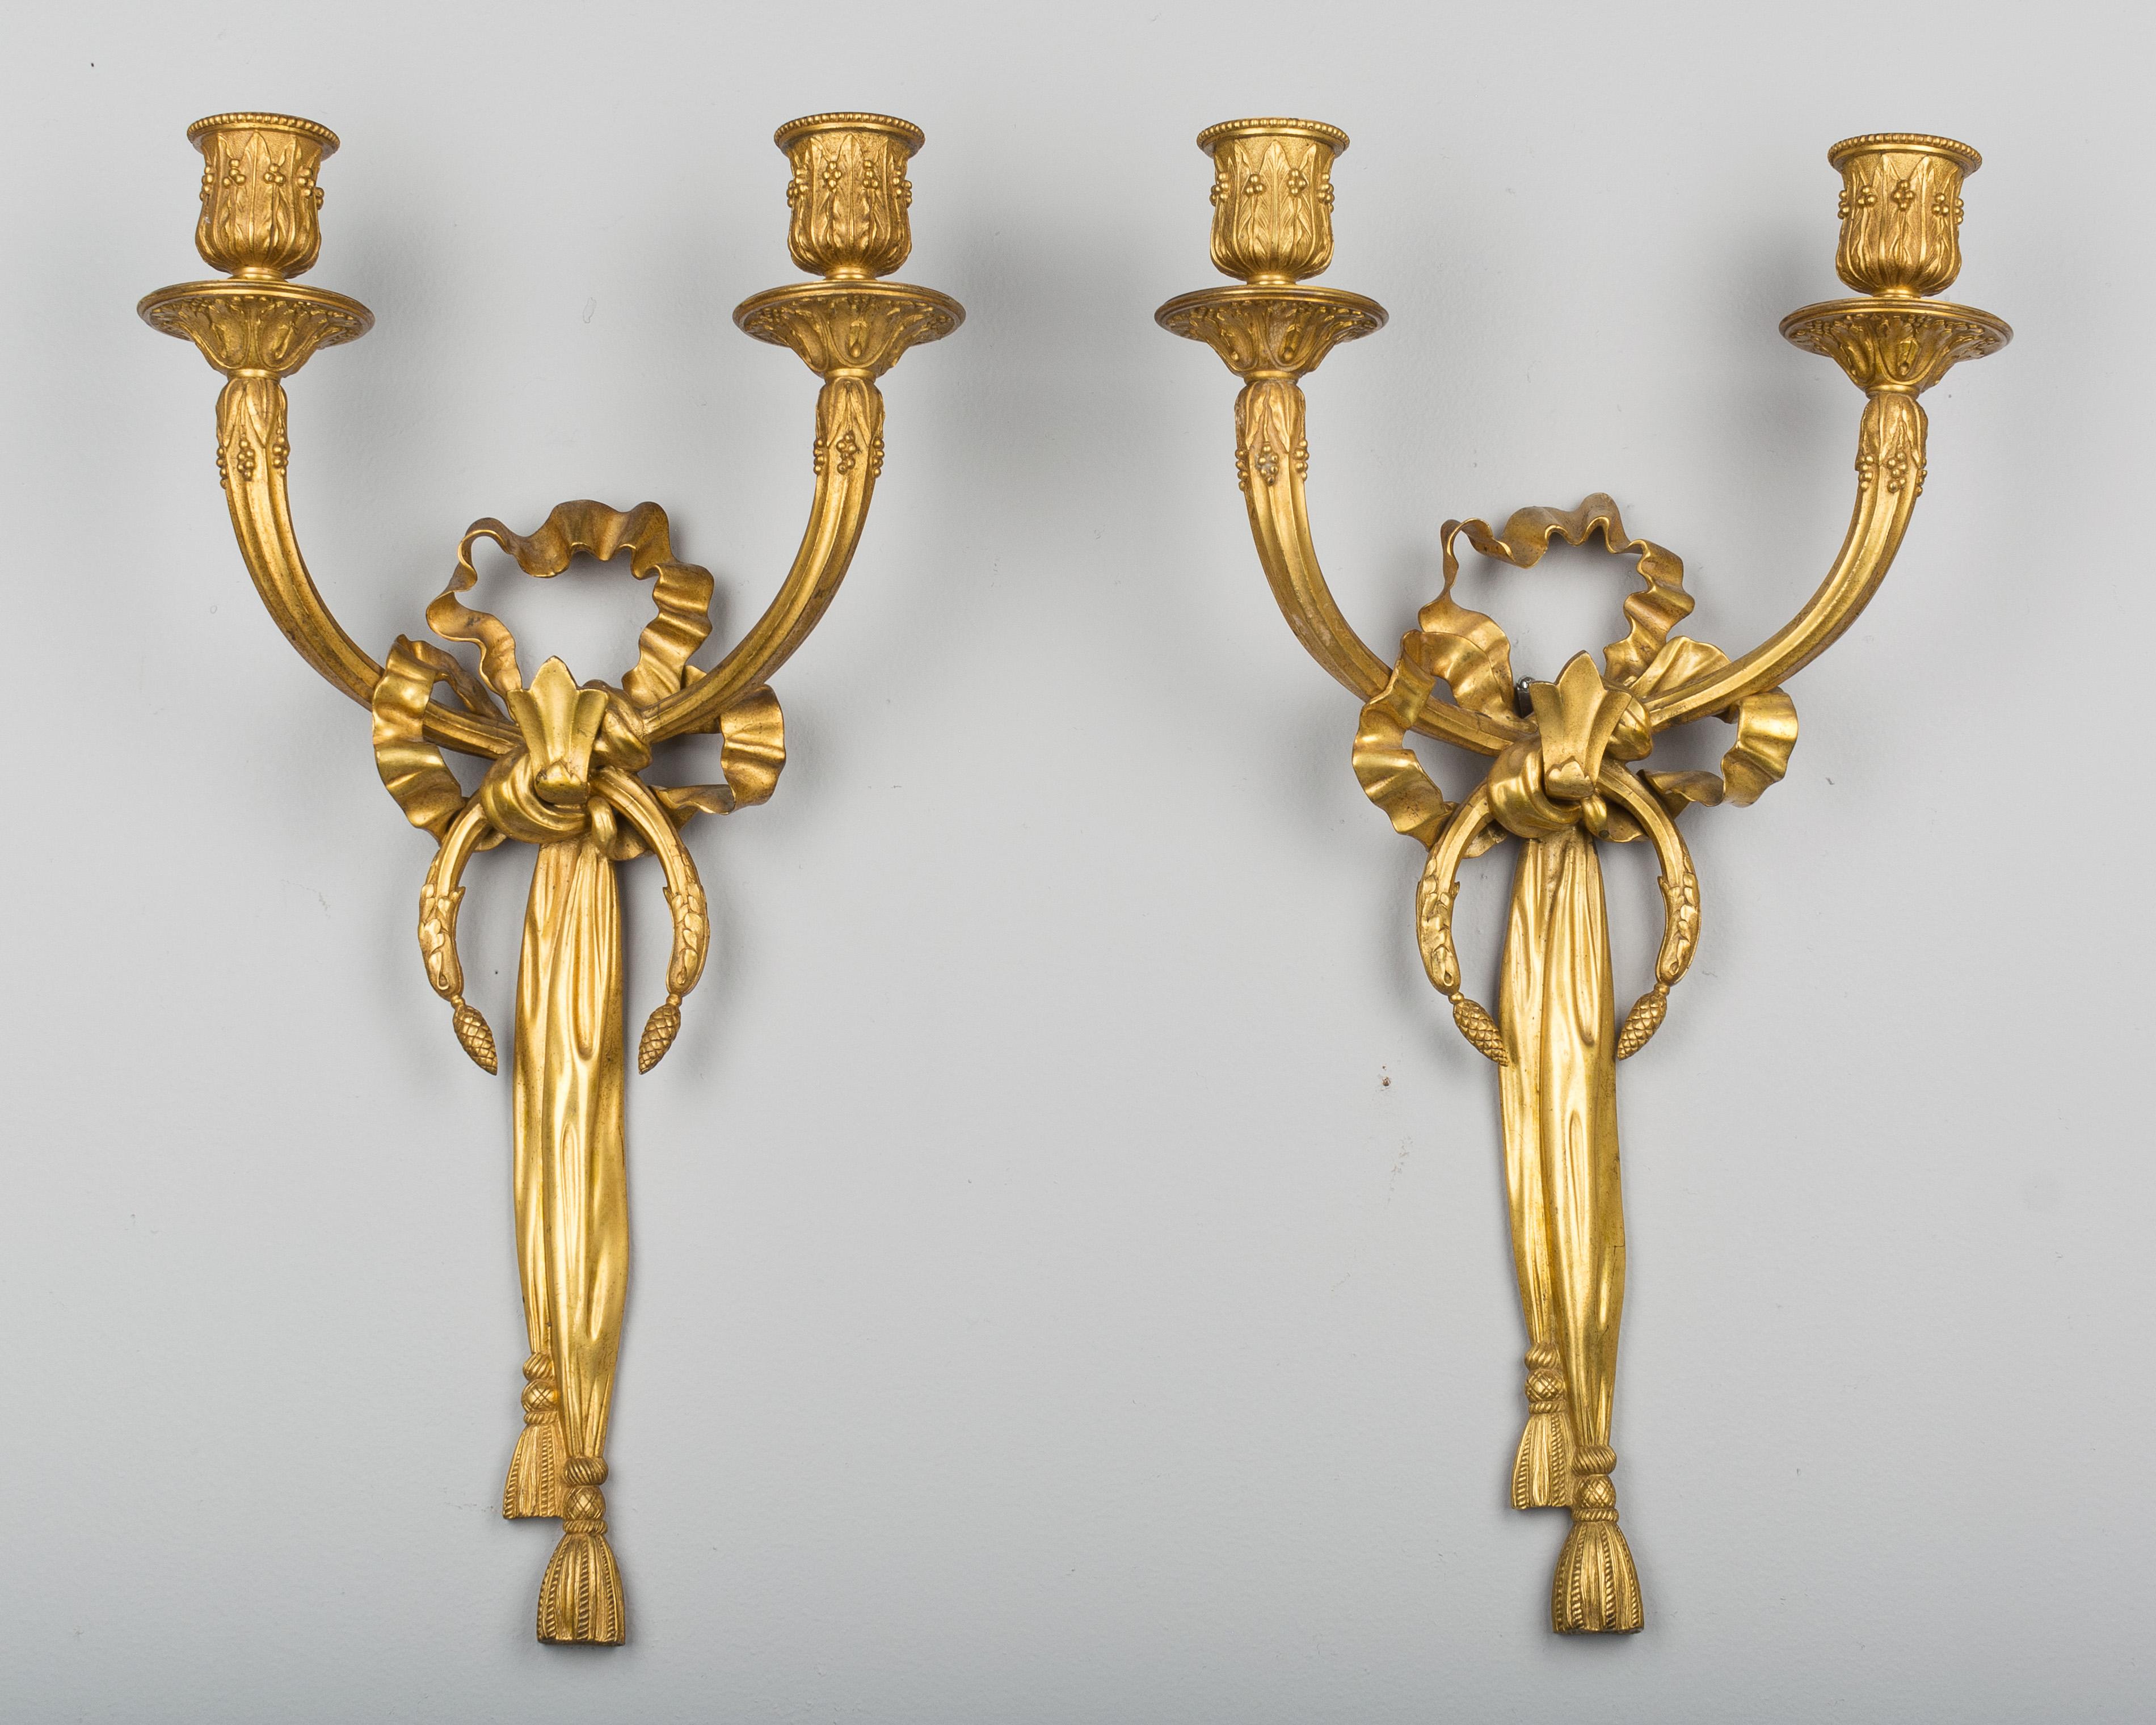 A pair of Louis XV style two-light gilt bronze candle sconces. Ribbon form with tassels and delicate foliate and floral details. Not wired. The bracket on the back of one of the sconces has a welded repair.
   